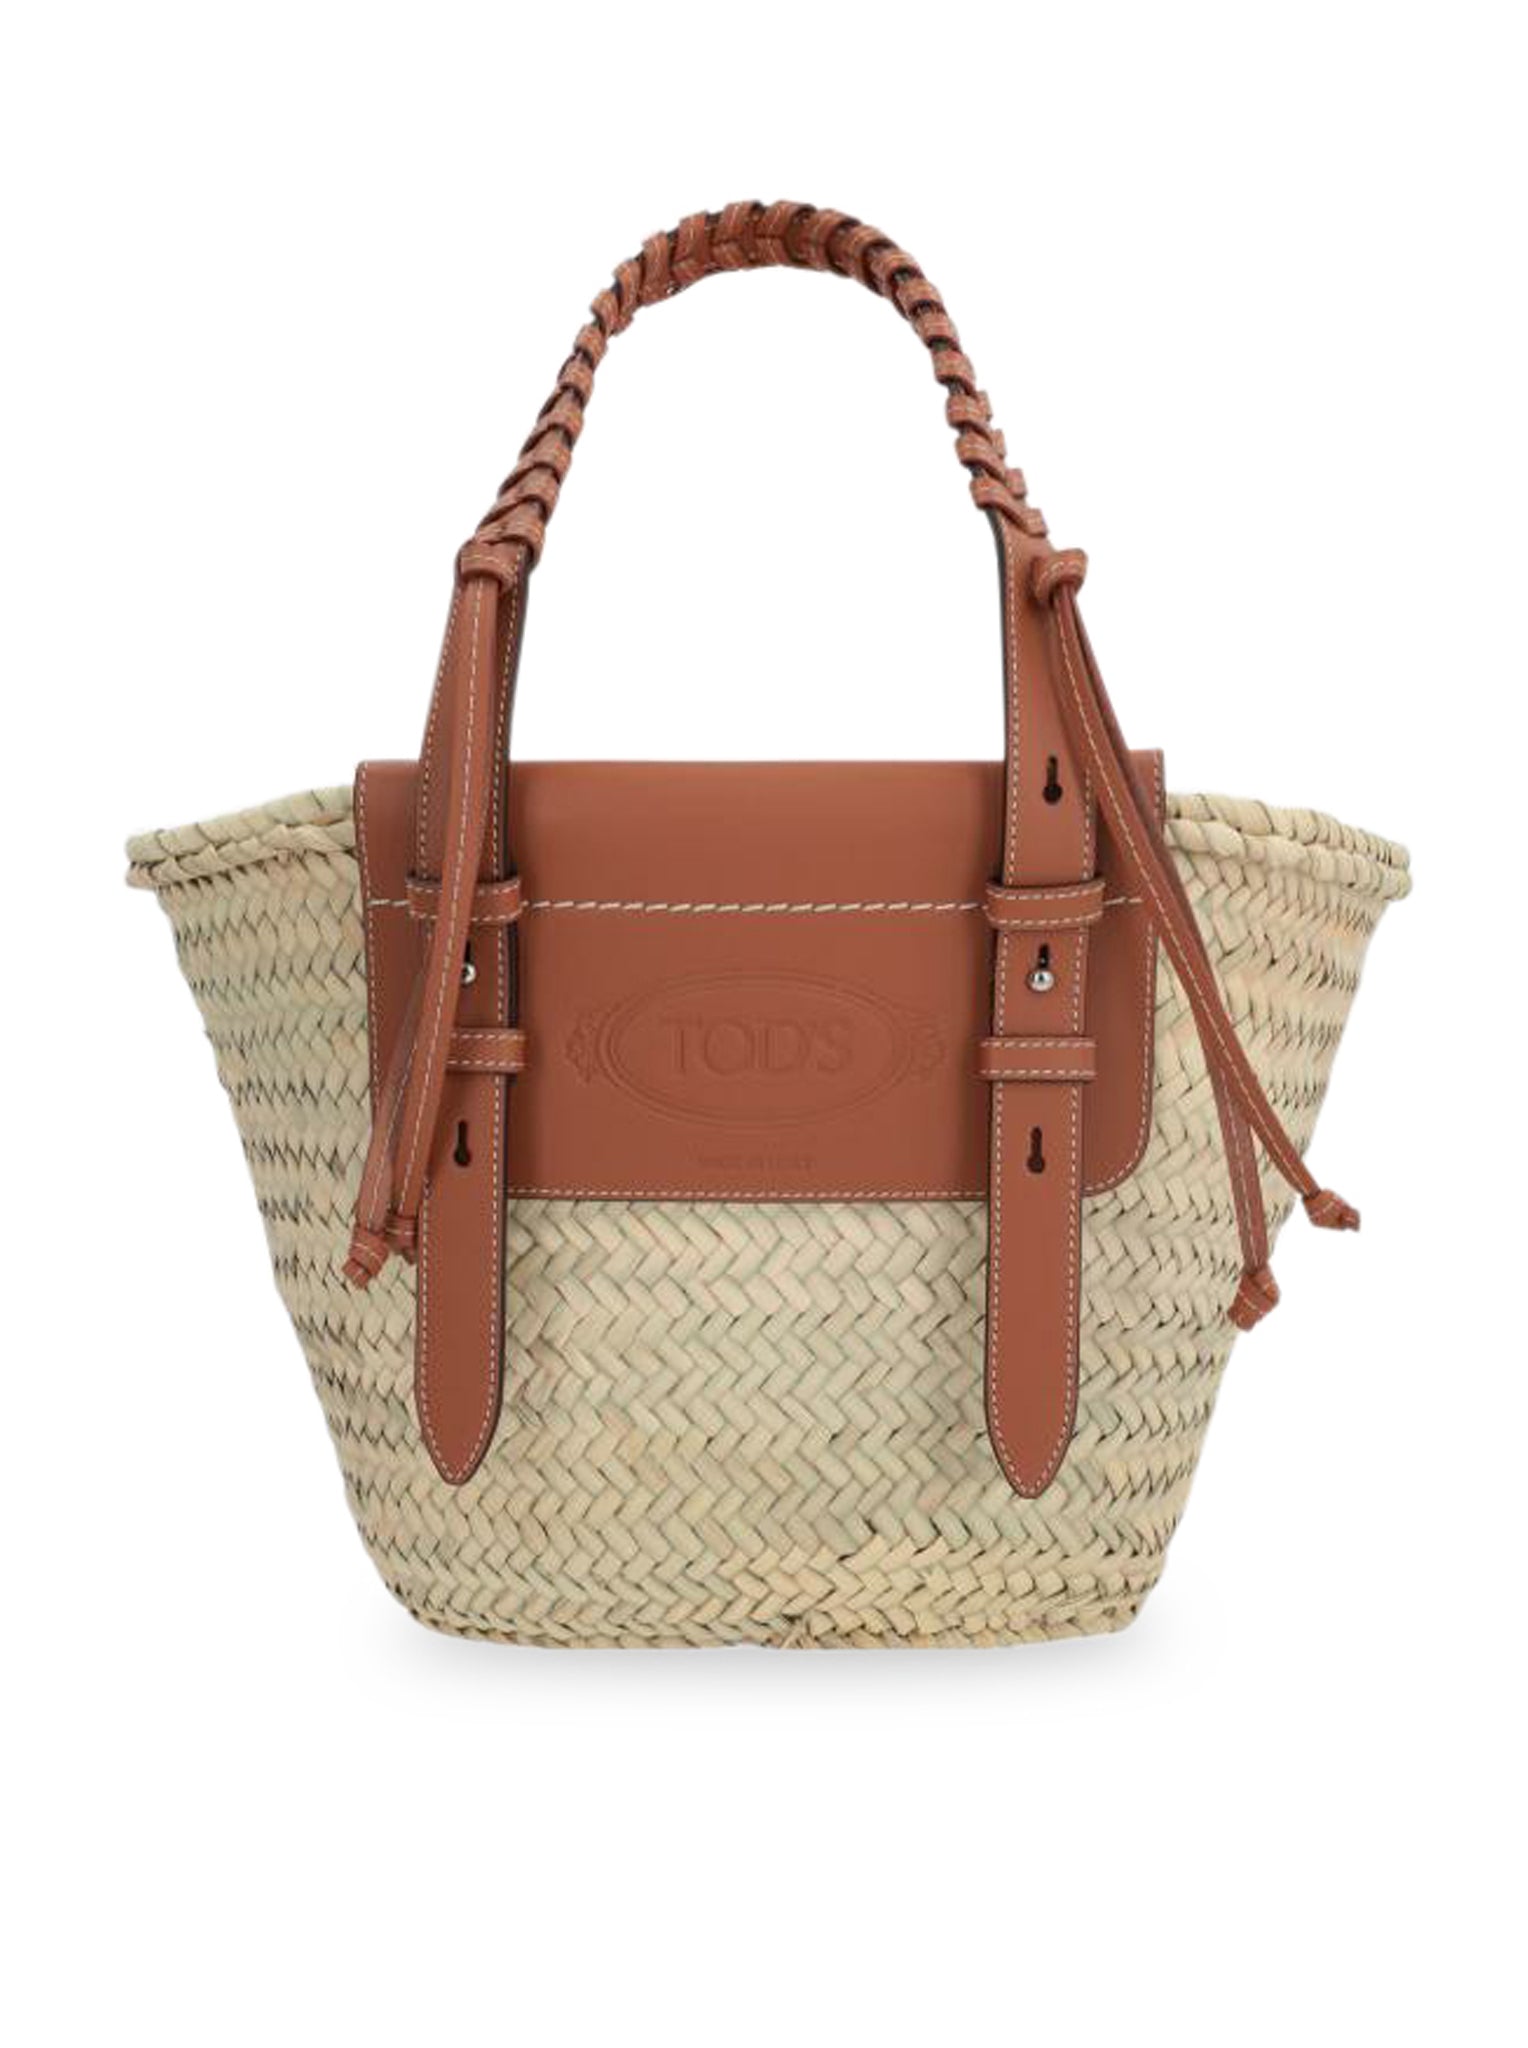 SHOPPING BAG IN STRAW AND SMOOTH LEATHER